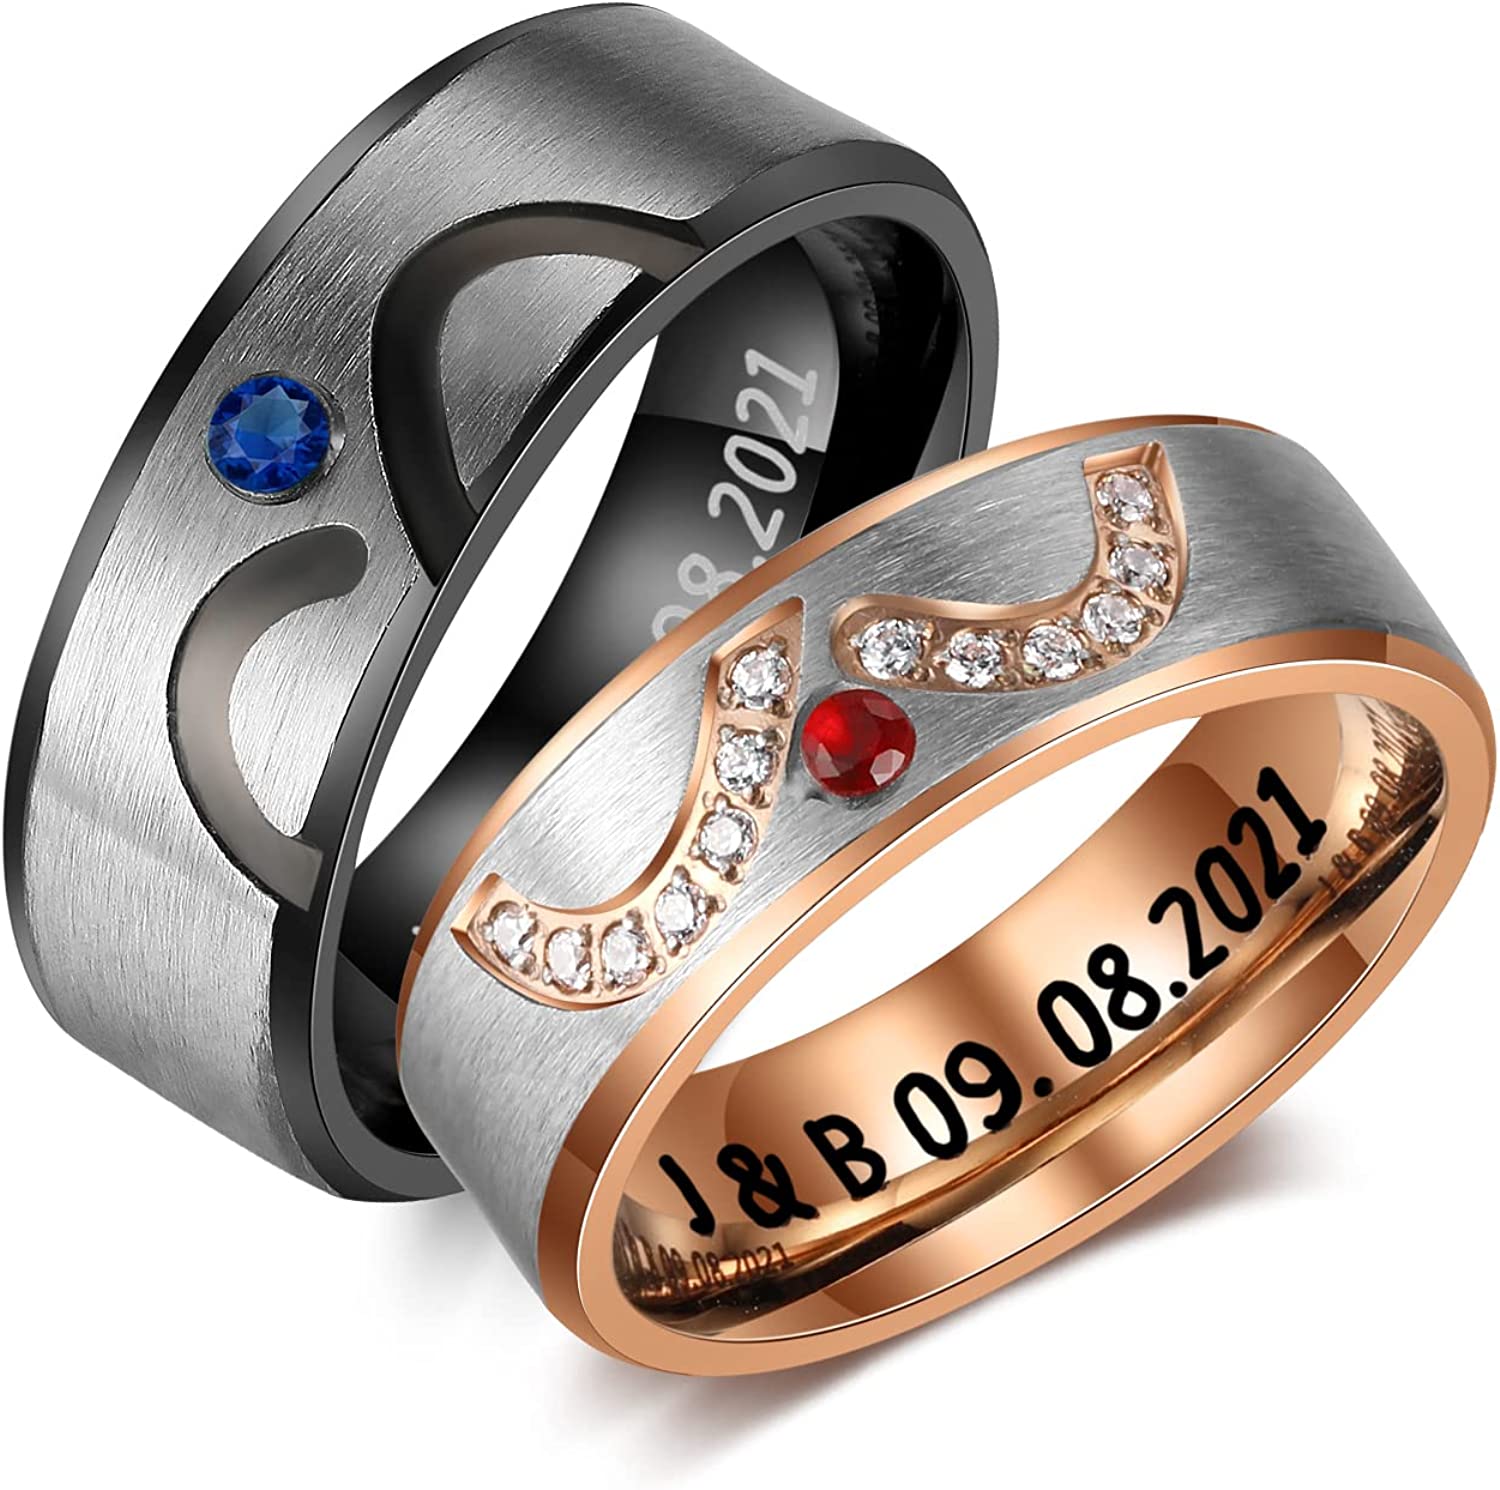 Valentine's Day Gift Customized Couple Ring Engrave Love Message Matching Rings Gift for Couple Friends BBF